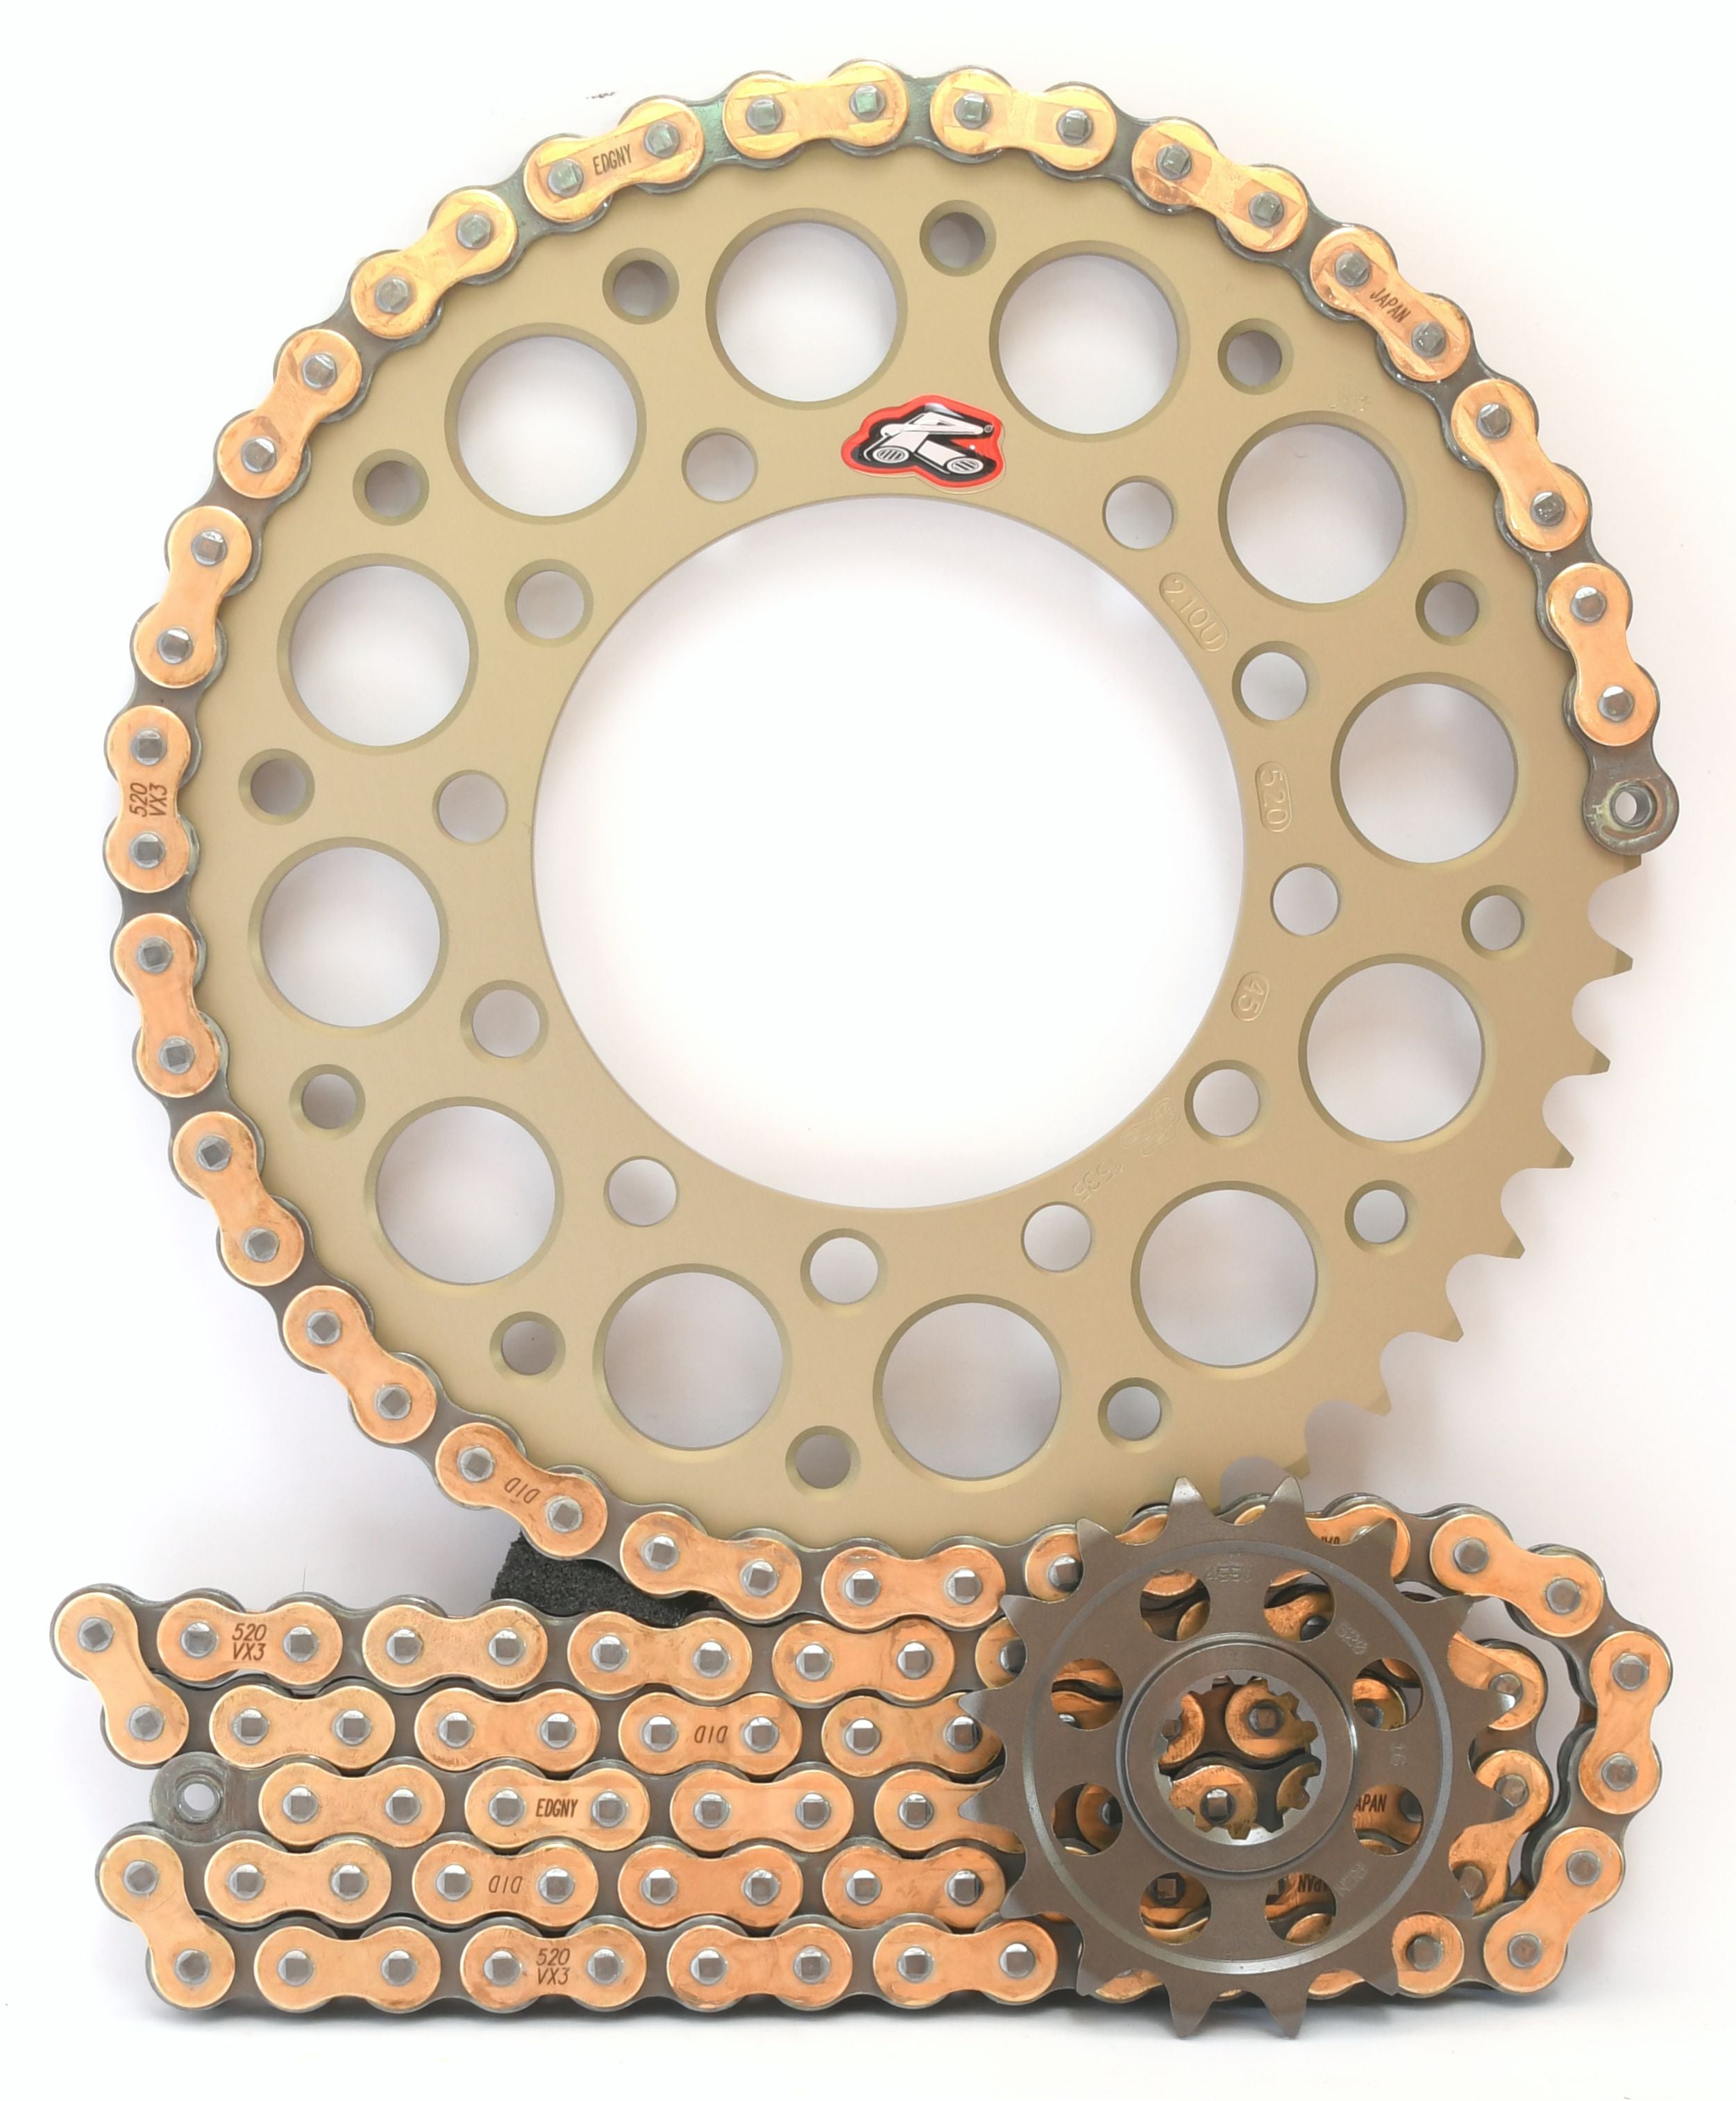 Renthal Ultralight and DID 520 Conversion Chain & Sprocket Kit for Yamaha YZF R1 2015> - Choose Your Gearing